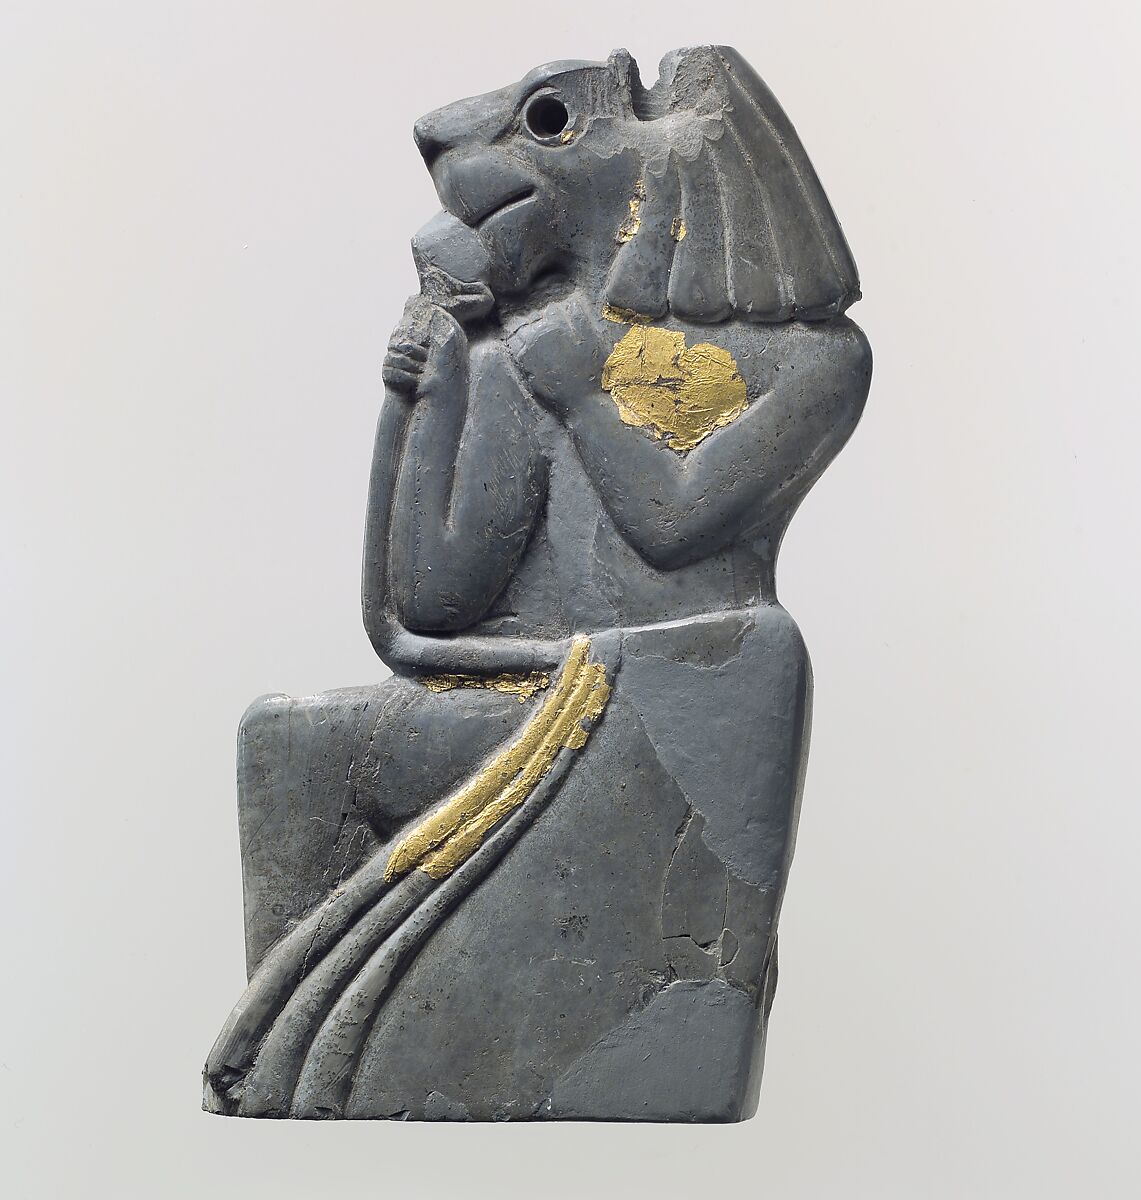 Plaque fragment: kneeling lion-headed figure, Ivory (hippopotamus), gold foil, Old Assyrian Trading Colony 